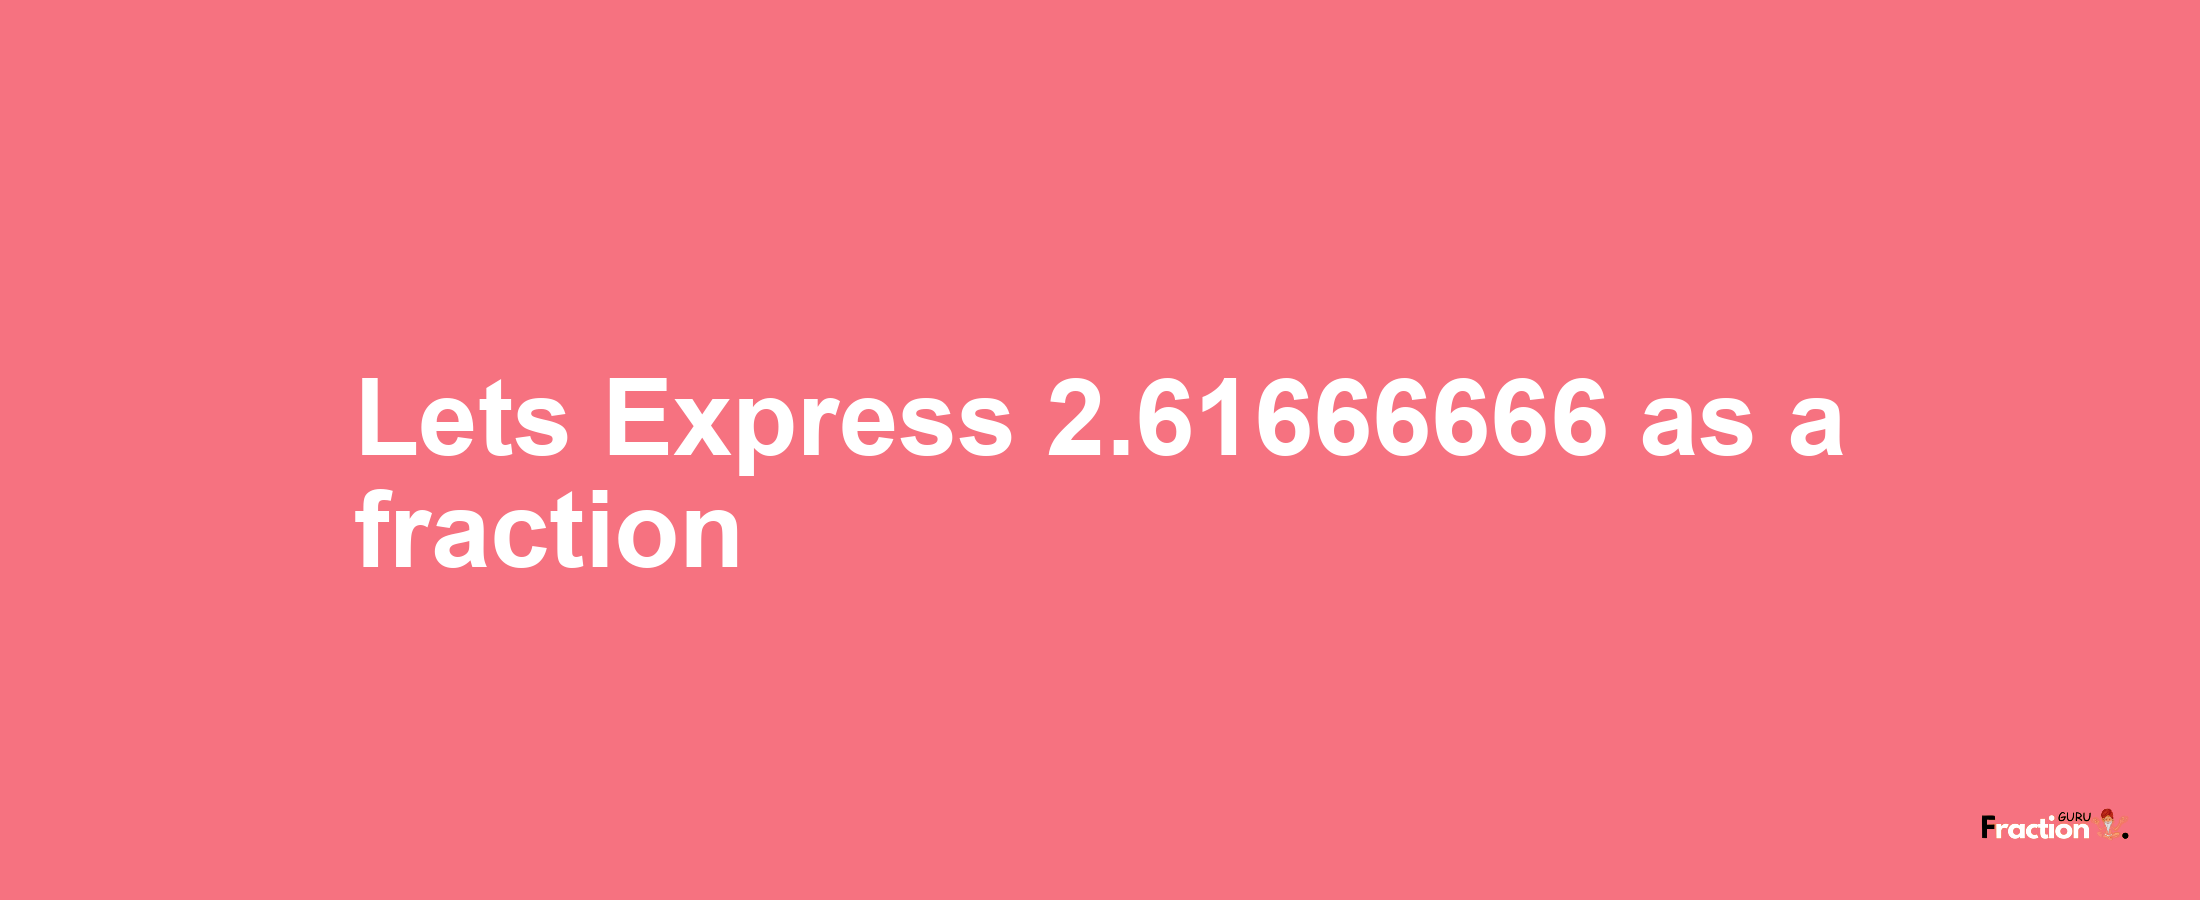 Lets Express 2.61666666 as afraction